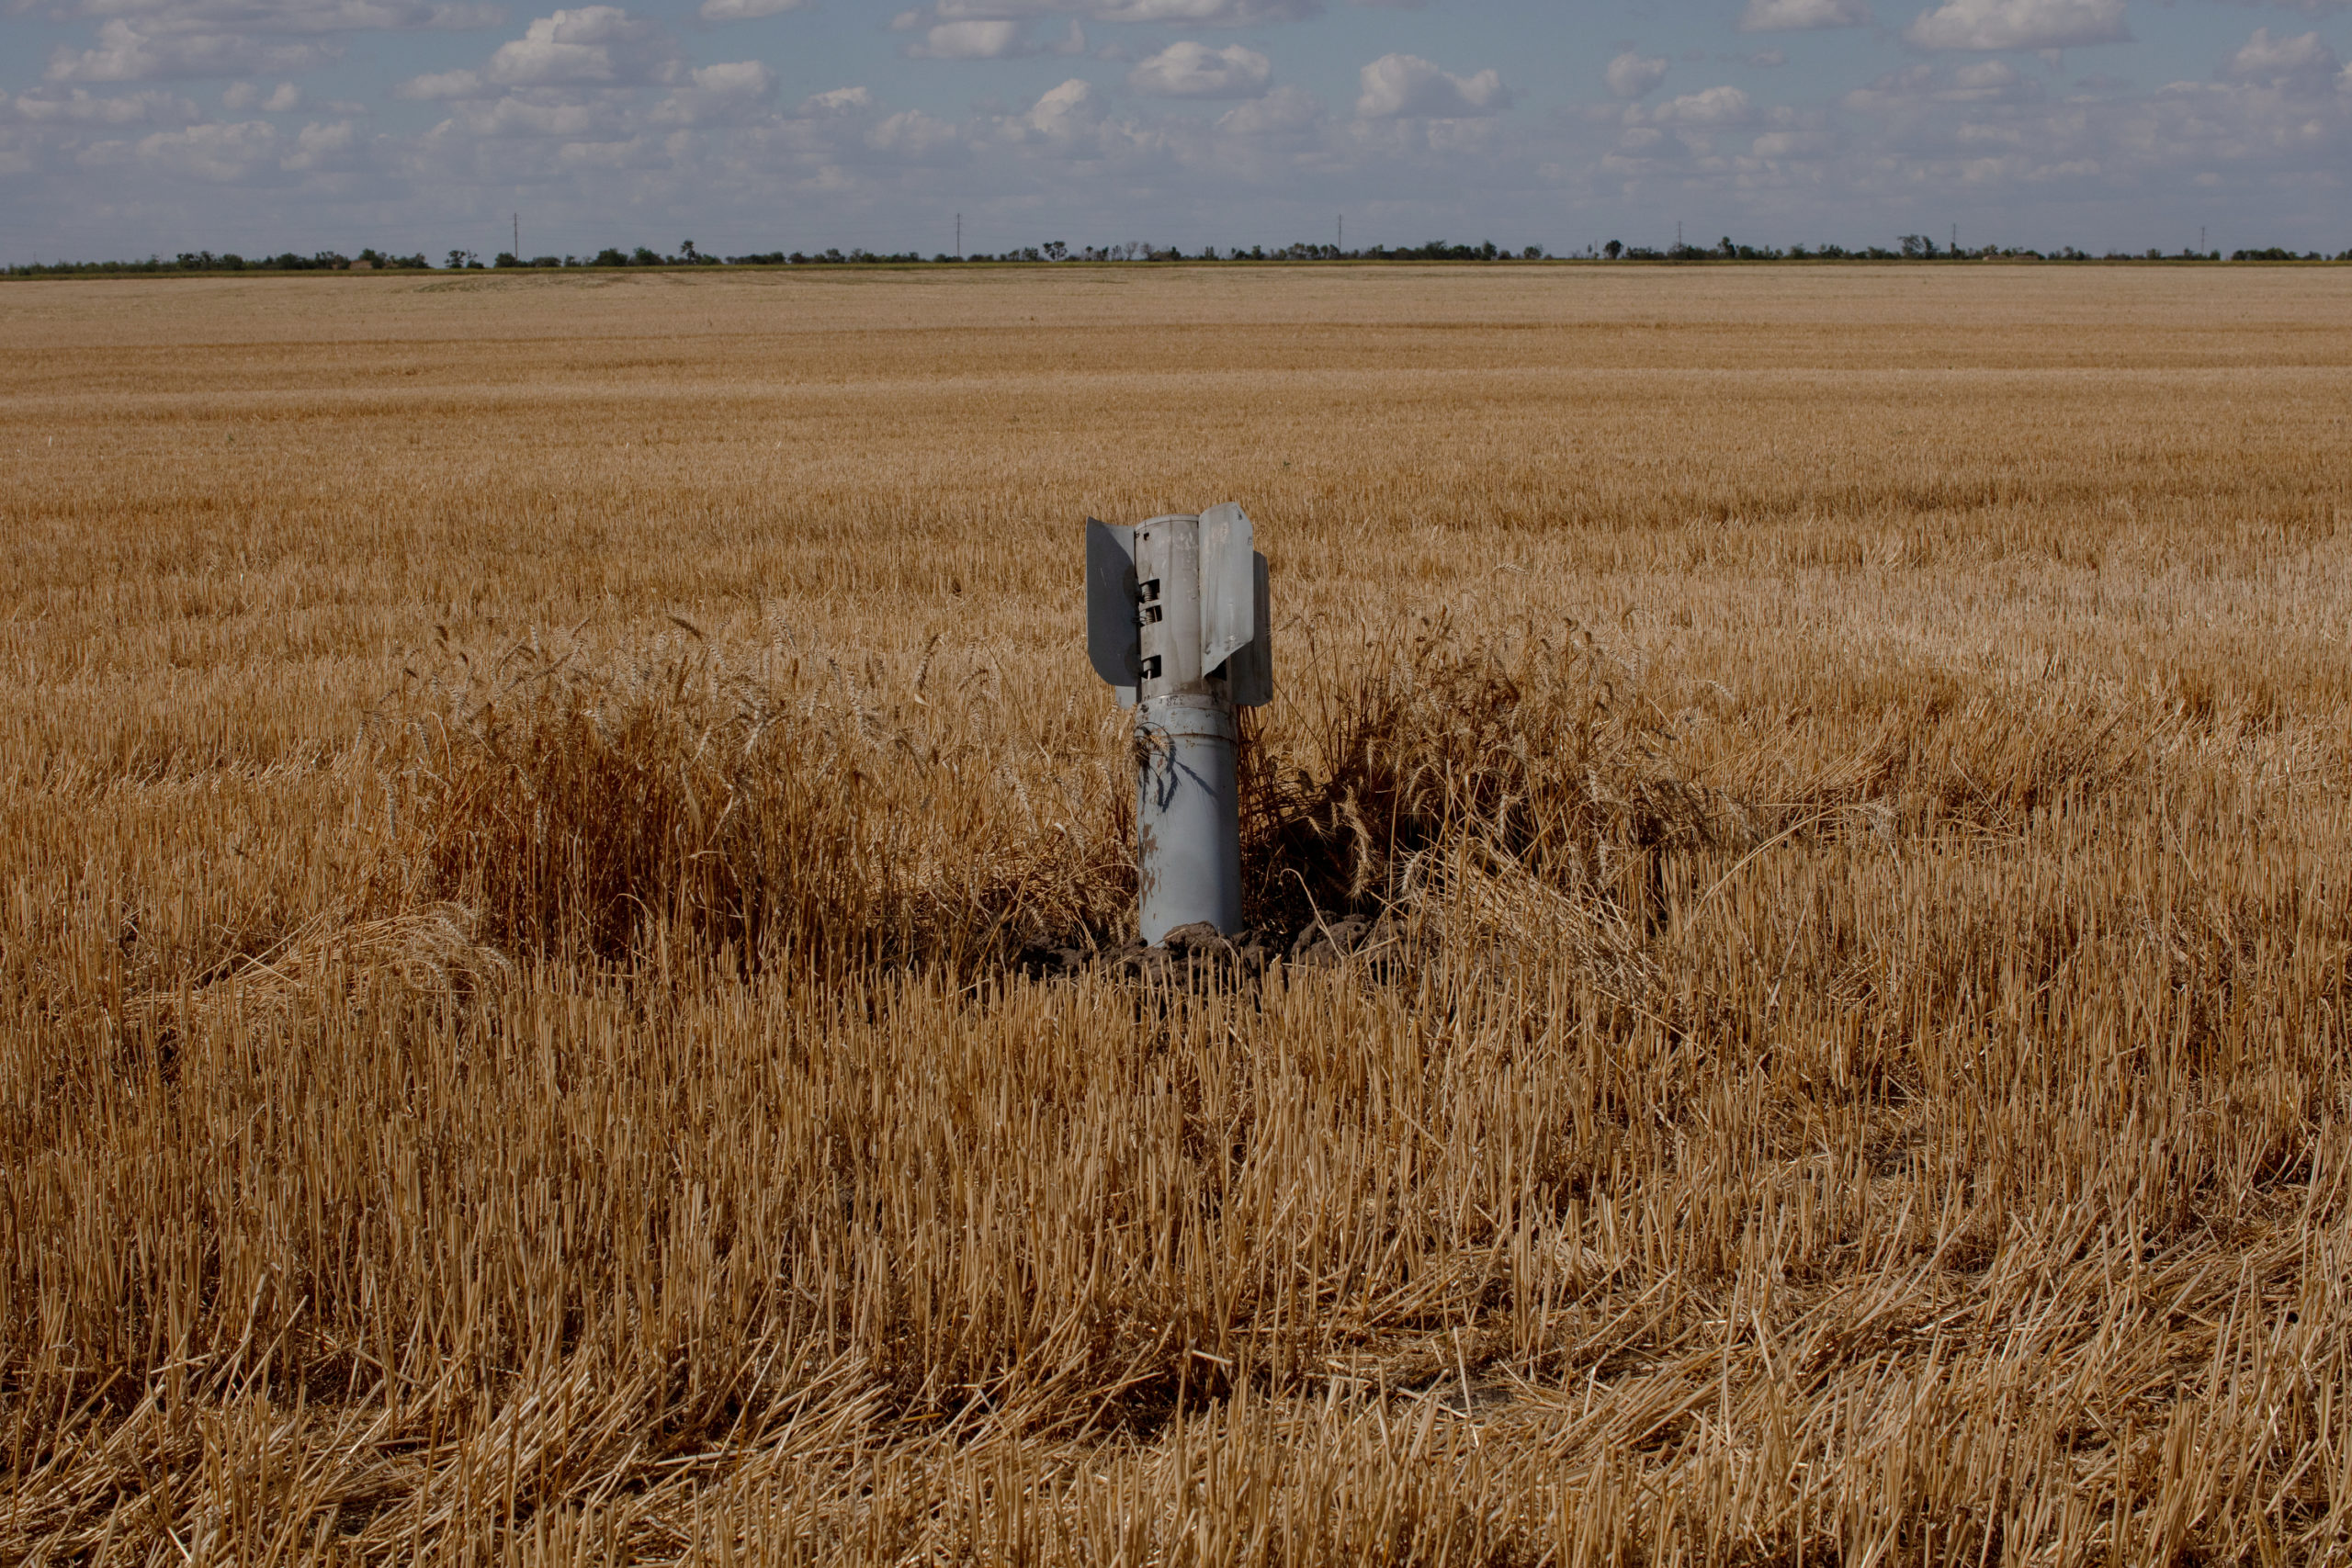 A missile shell lodged into a field